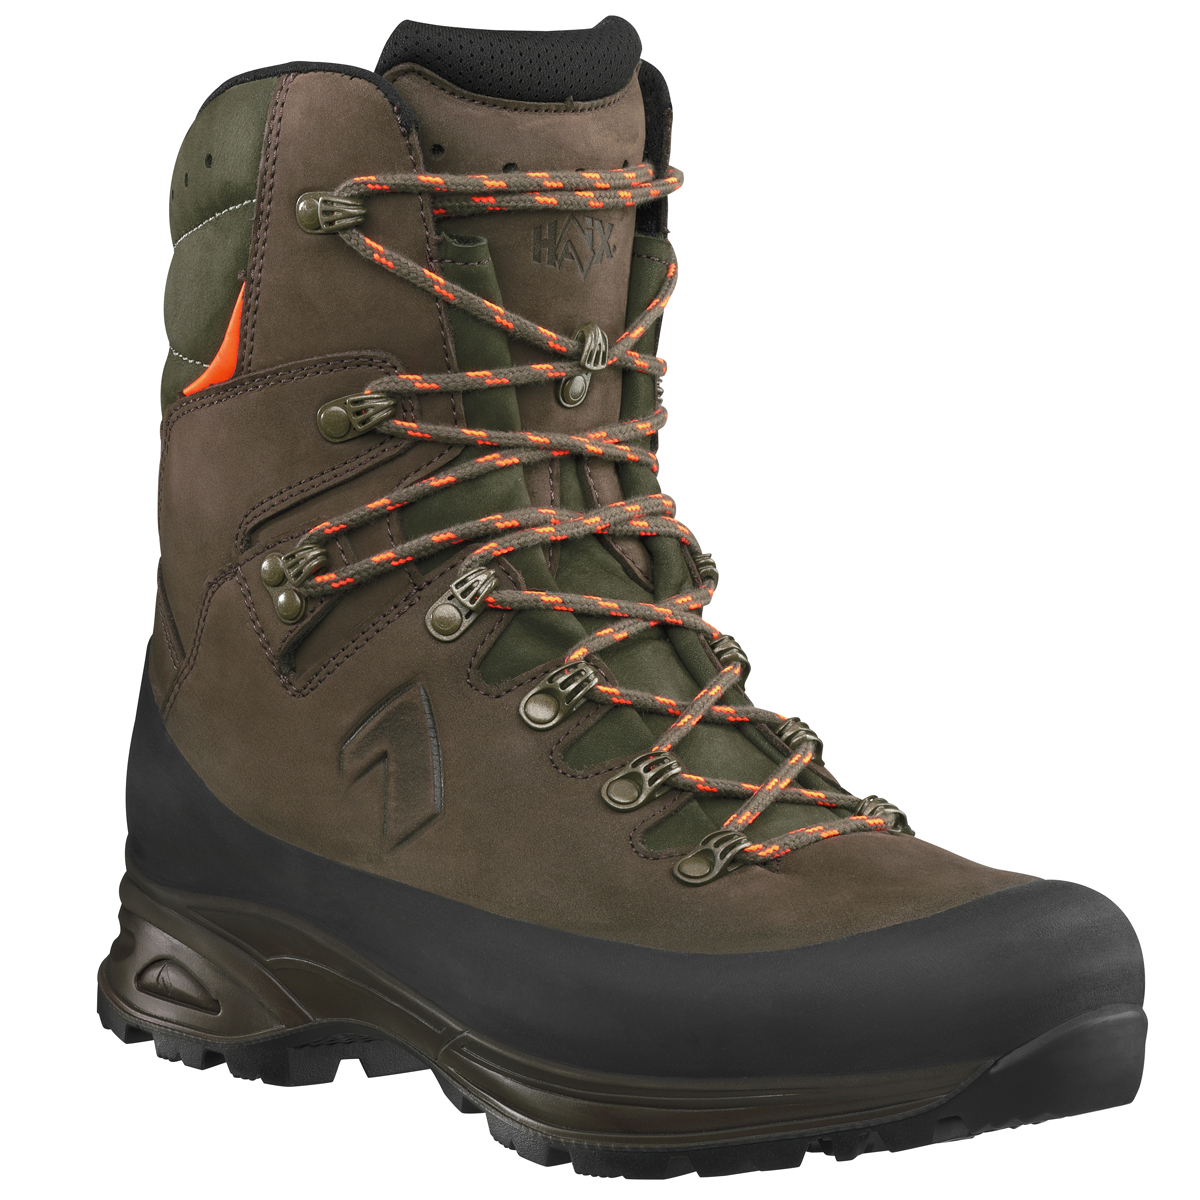 Haix Nature One GTX hunting boots